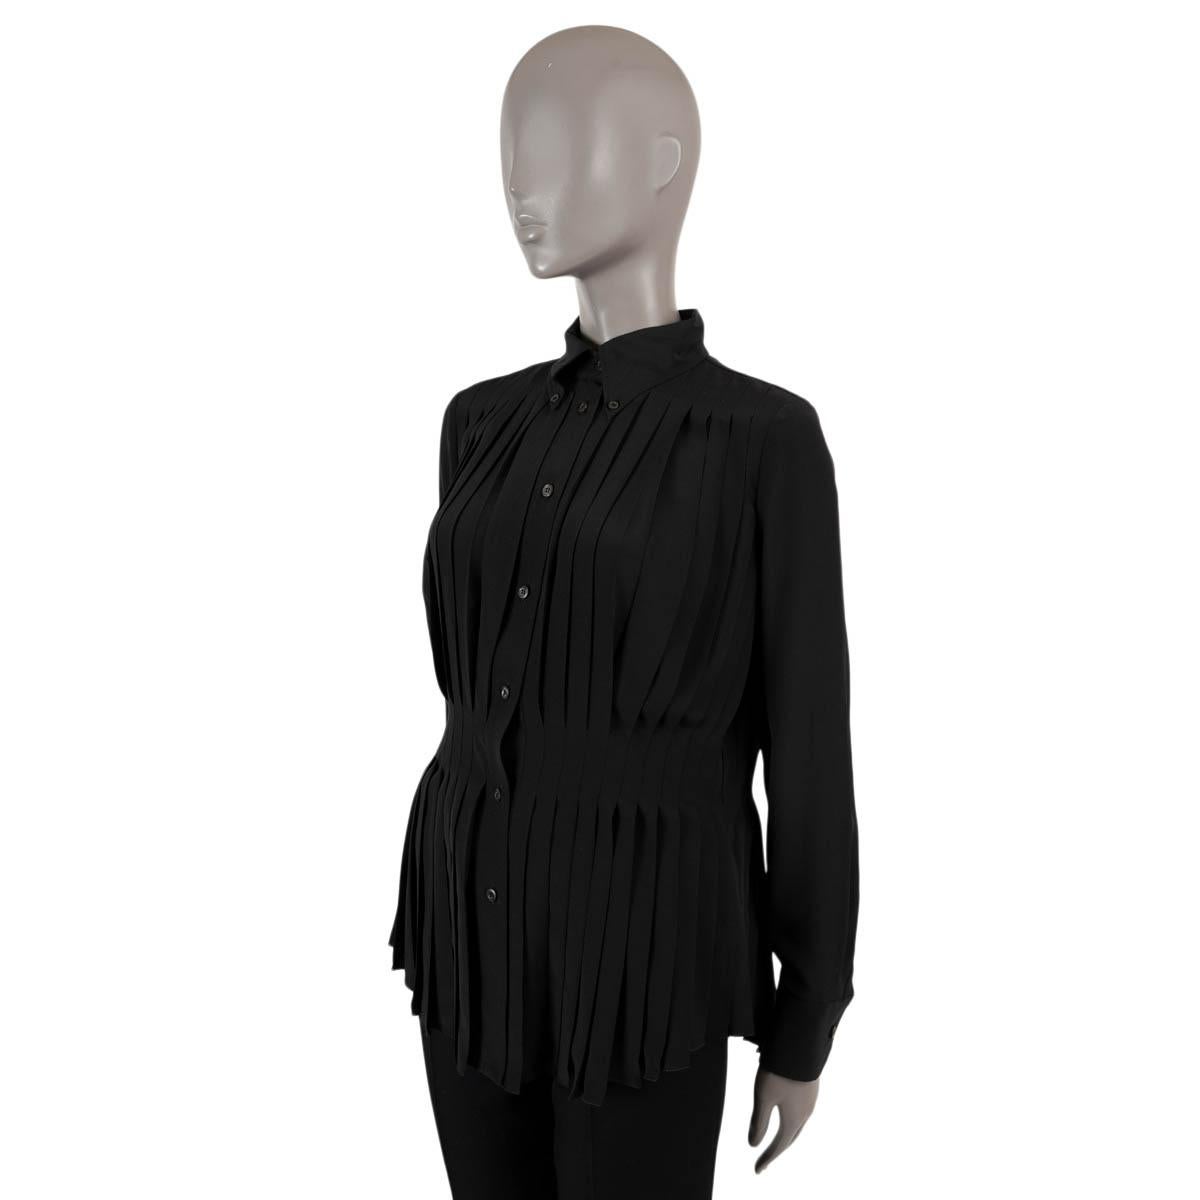 100% authentic Prada pleated blouse in black in silk (100%). Opens with buttons on the front. Unlined. Has been worn and is in excellent condition.

Measurements
Tag Size	40
Size	S
Shoulder Width	37cm (14.4in)
Bust From	104cm (40.6in)
Waist